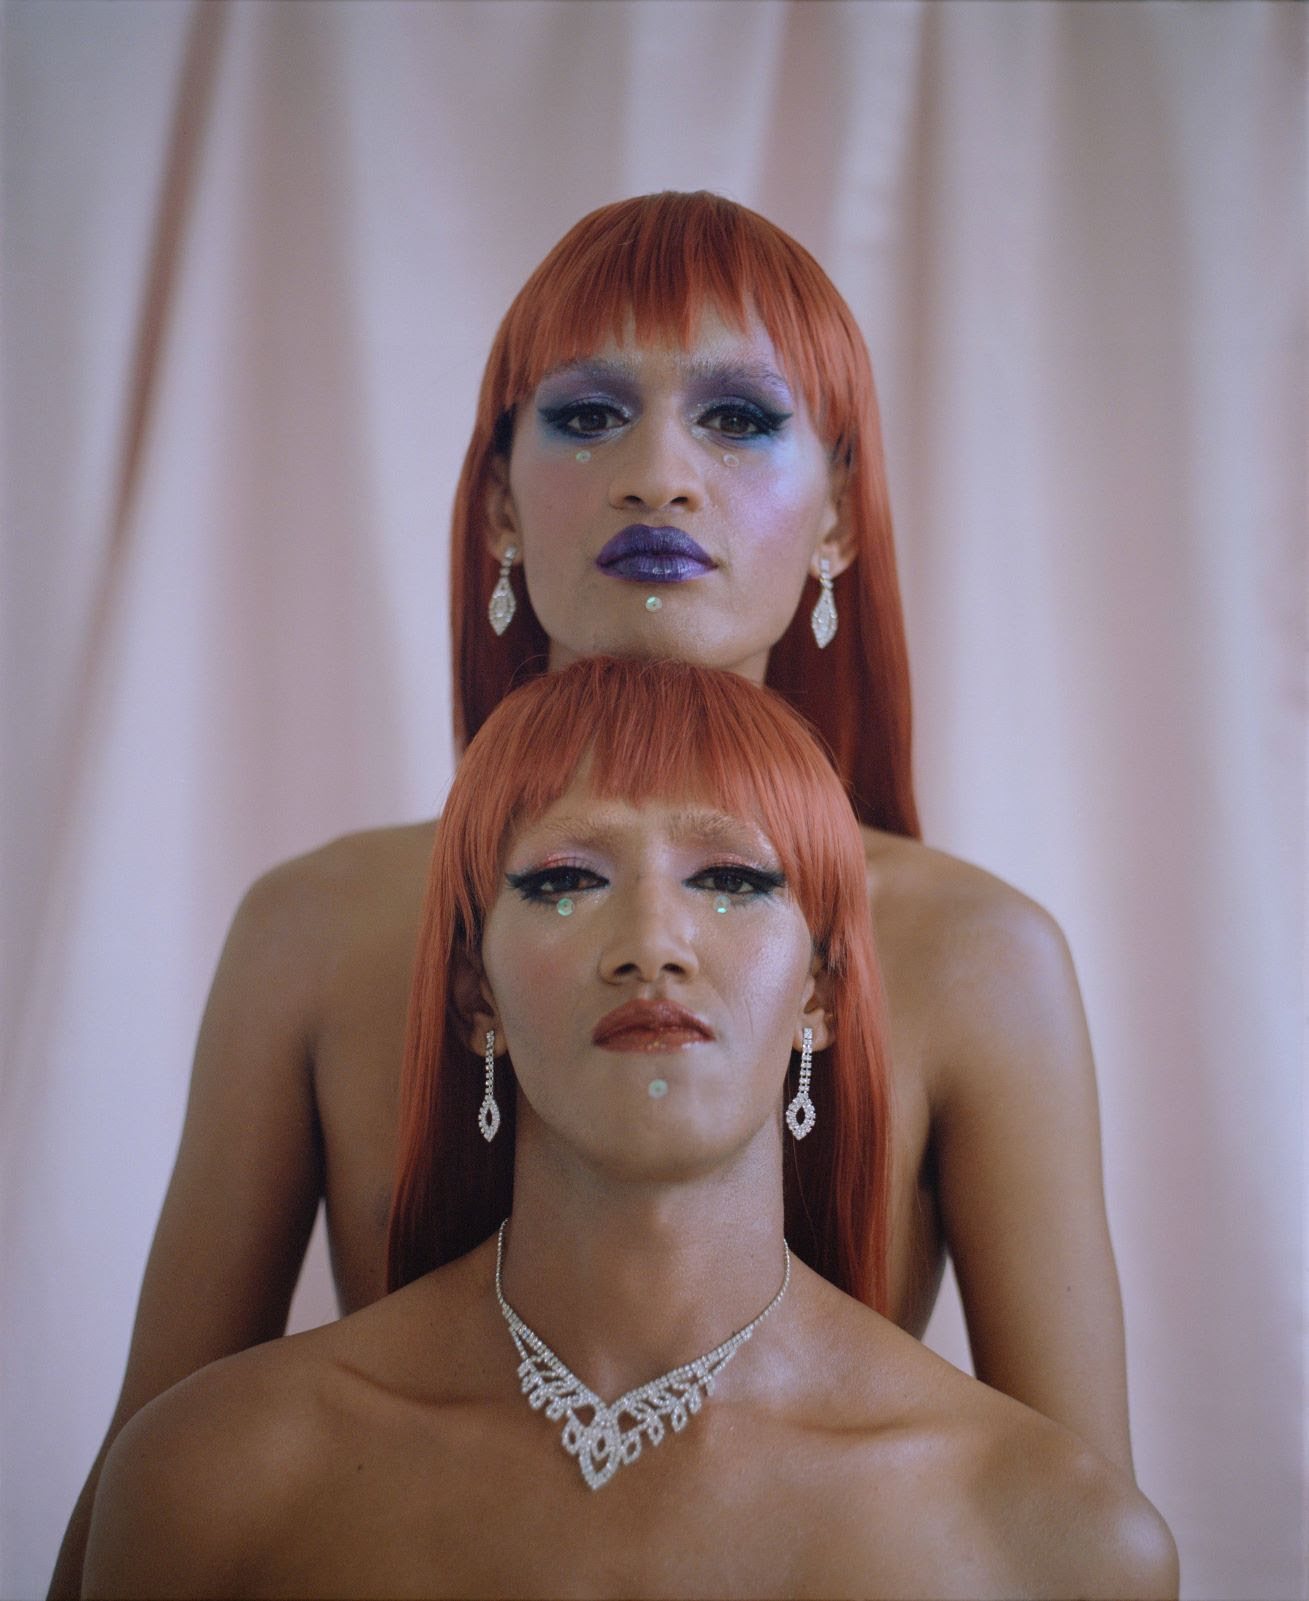 [IMAGE] Photograph showing two trans women topless with long, straight red hair, and blue makeup. One is stood in front of the other and they are both looking straight into the camera.